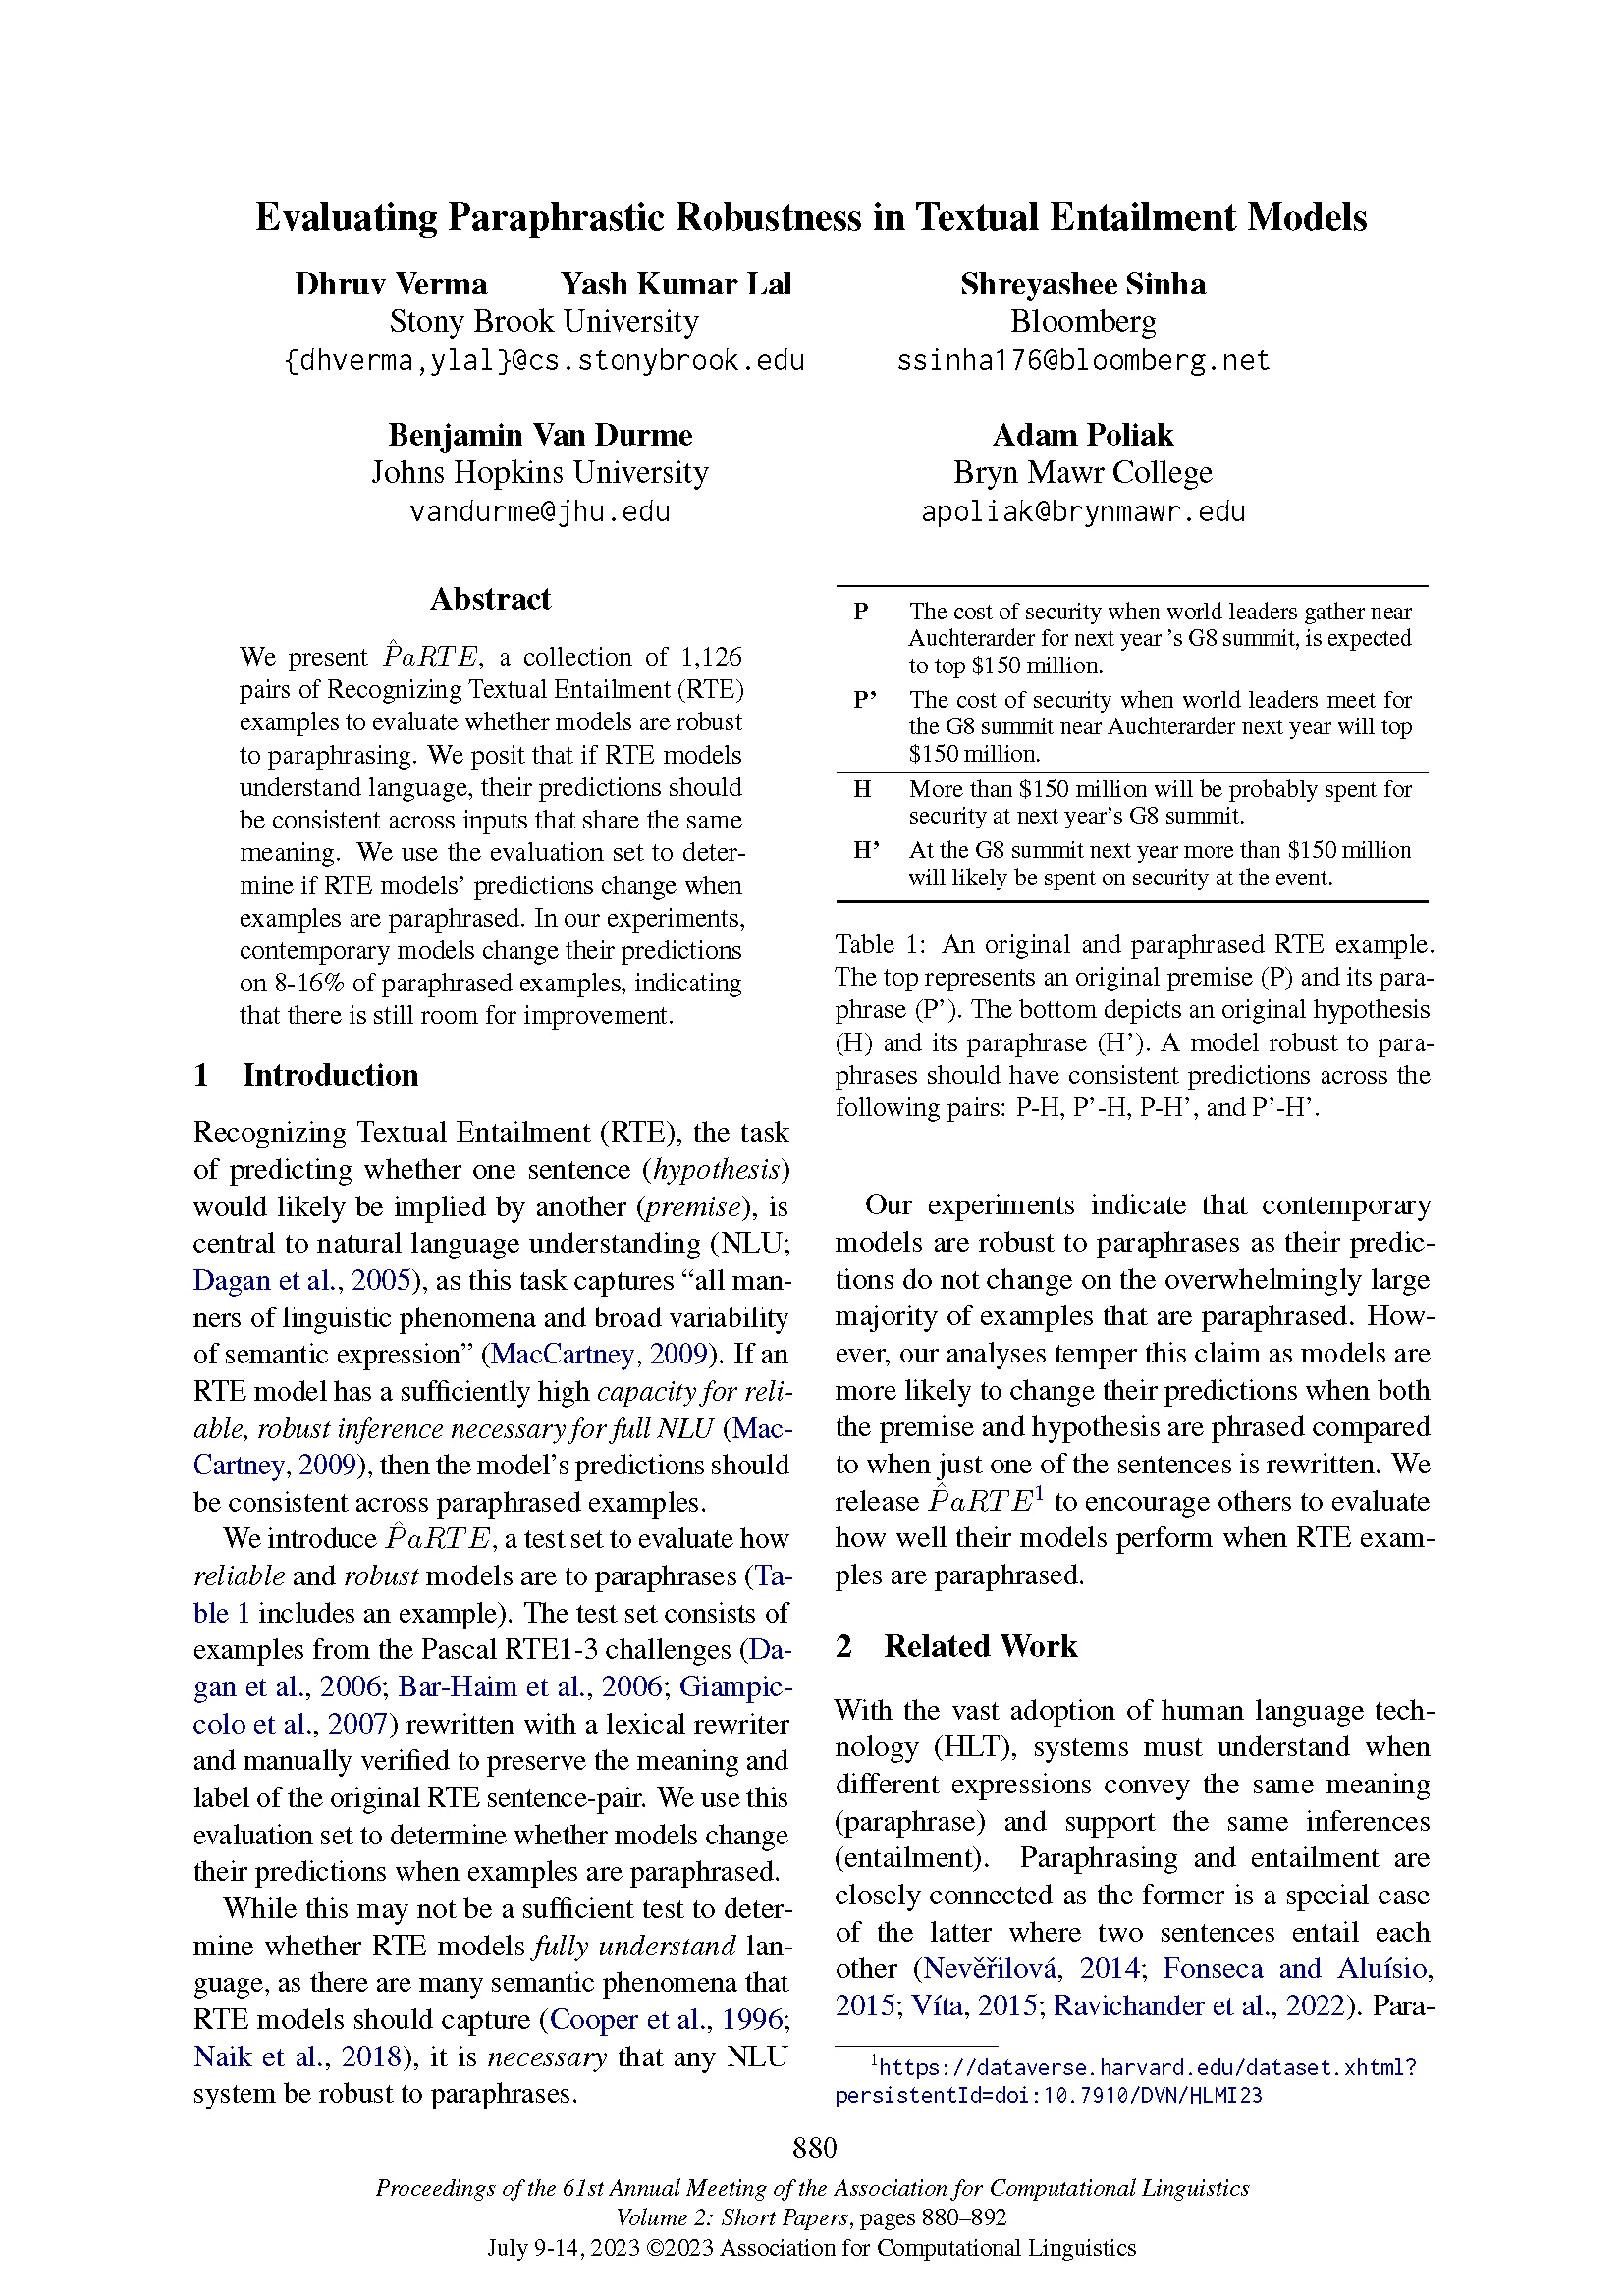 Front page of ACL 2023 paper "Evaluating Paraphrastic Robustness in Textual Entailment Models"